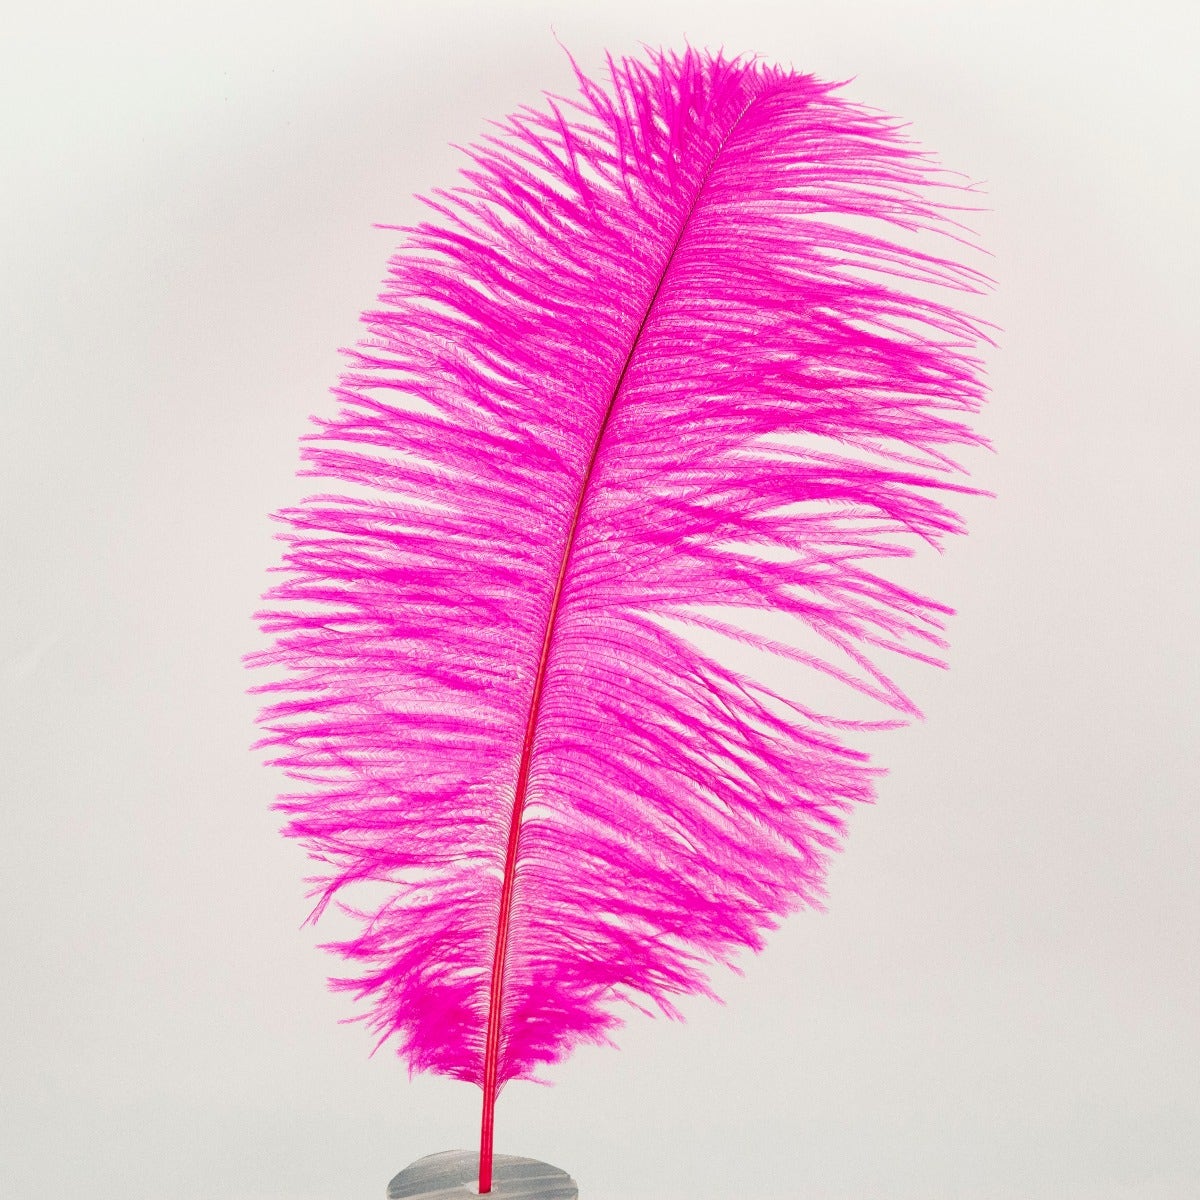 A single Neon Pink Ostrich Plume.